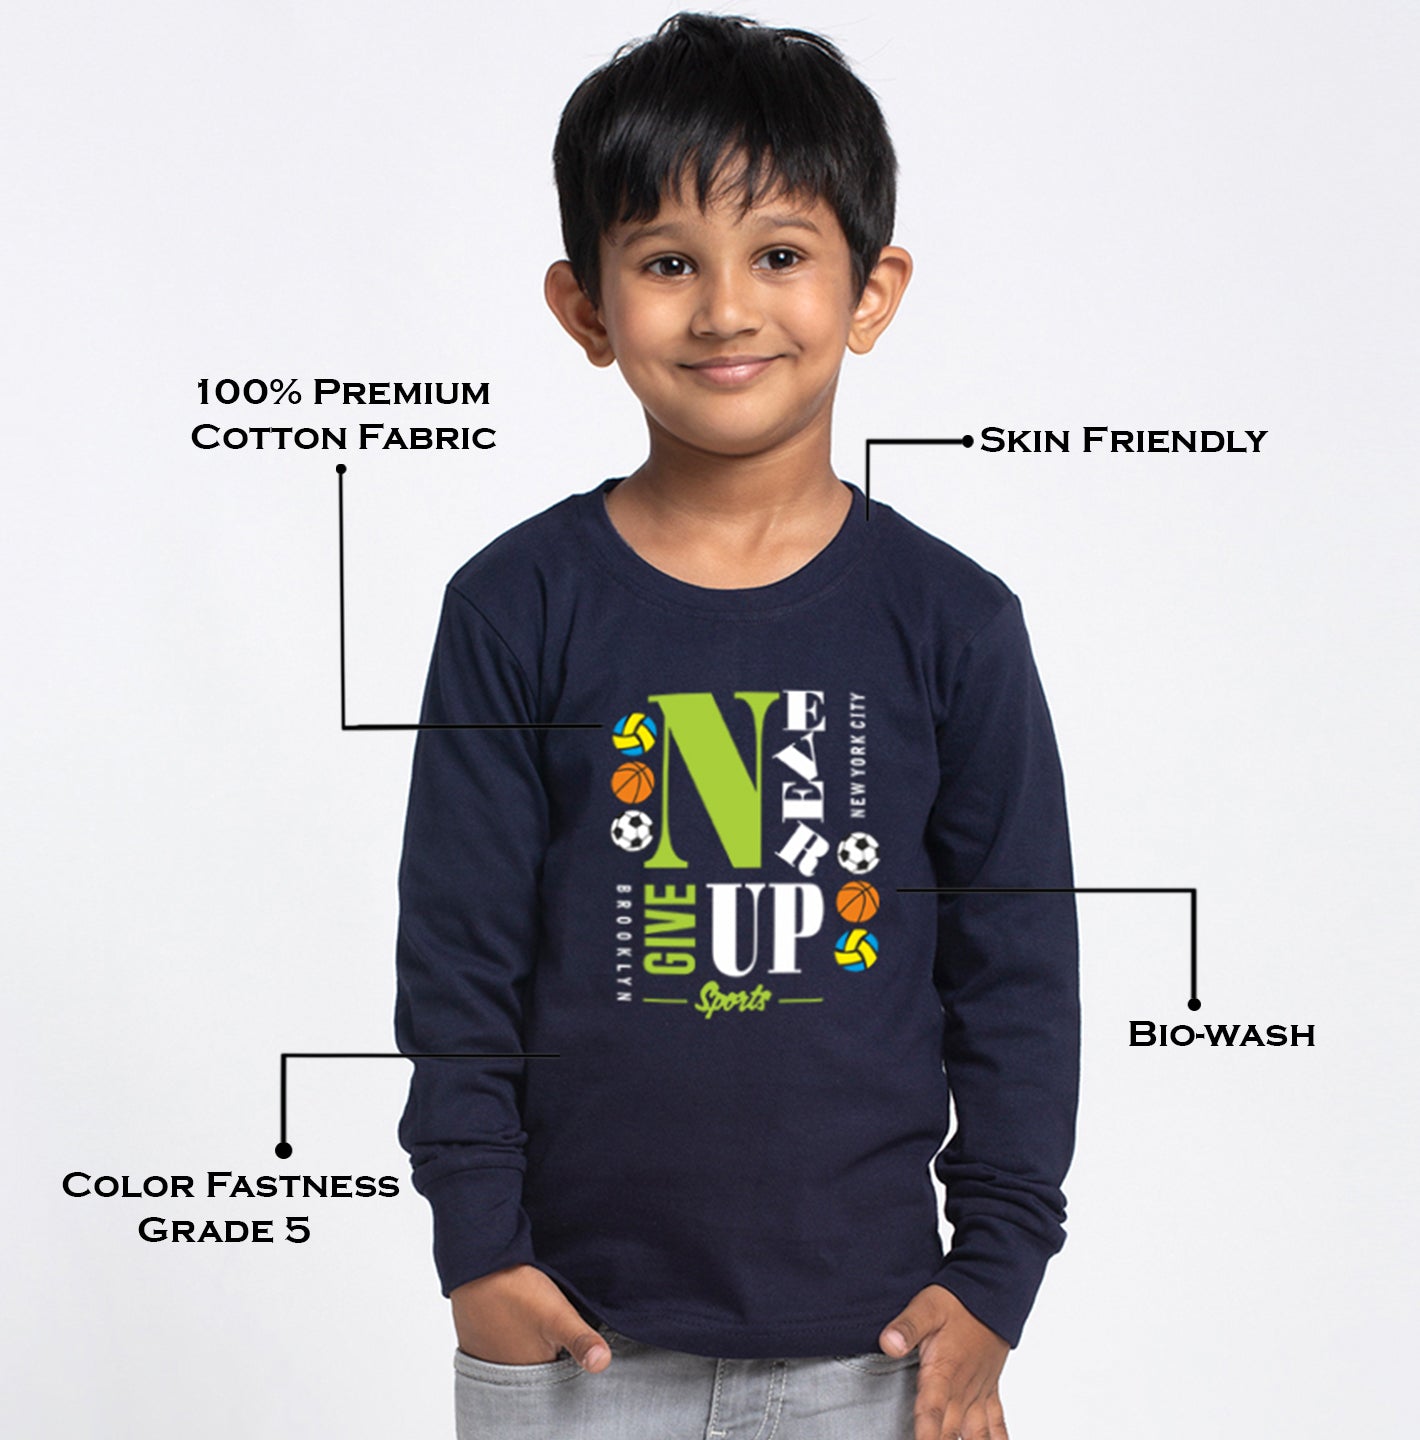 Kids Never Giveup printed full sleeves t-shirt - Friskers